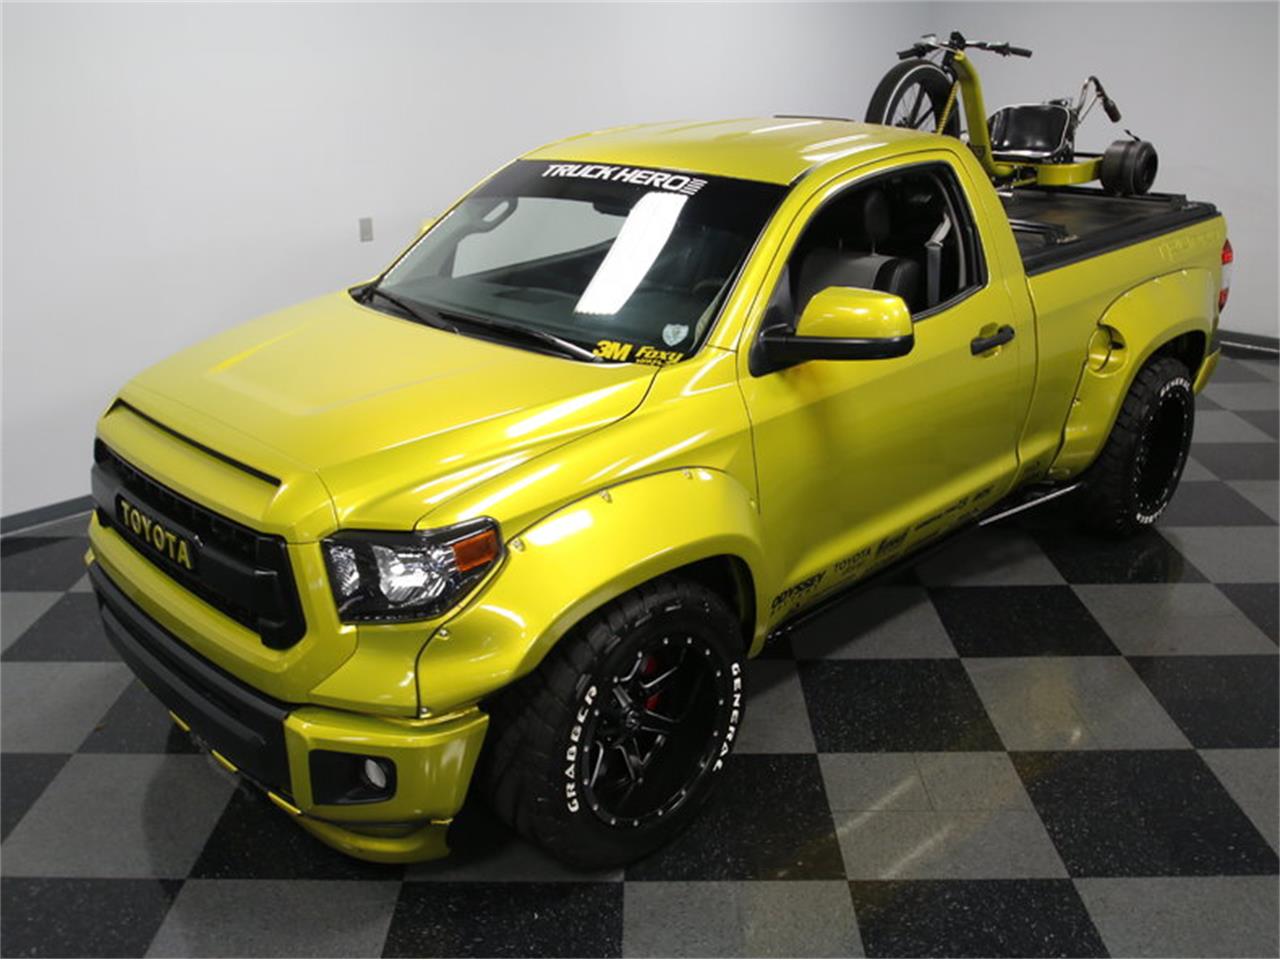 2008 Toyota Tundra TRD SUPERCHARGED for Sale | ClassicCars.com | CC-1026608